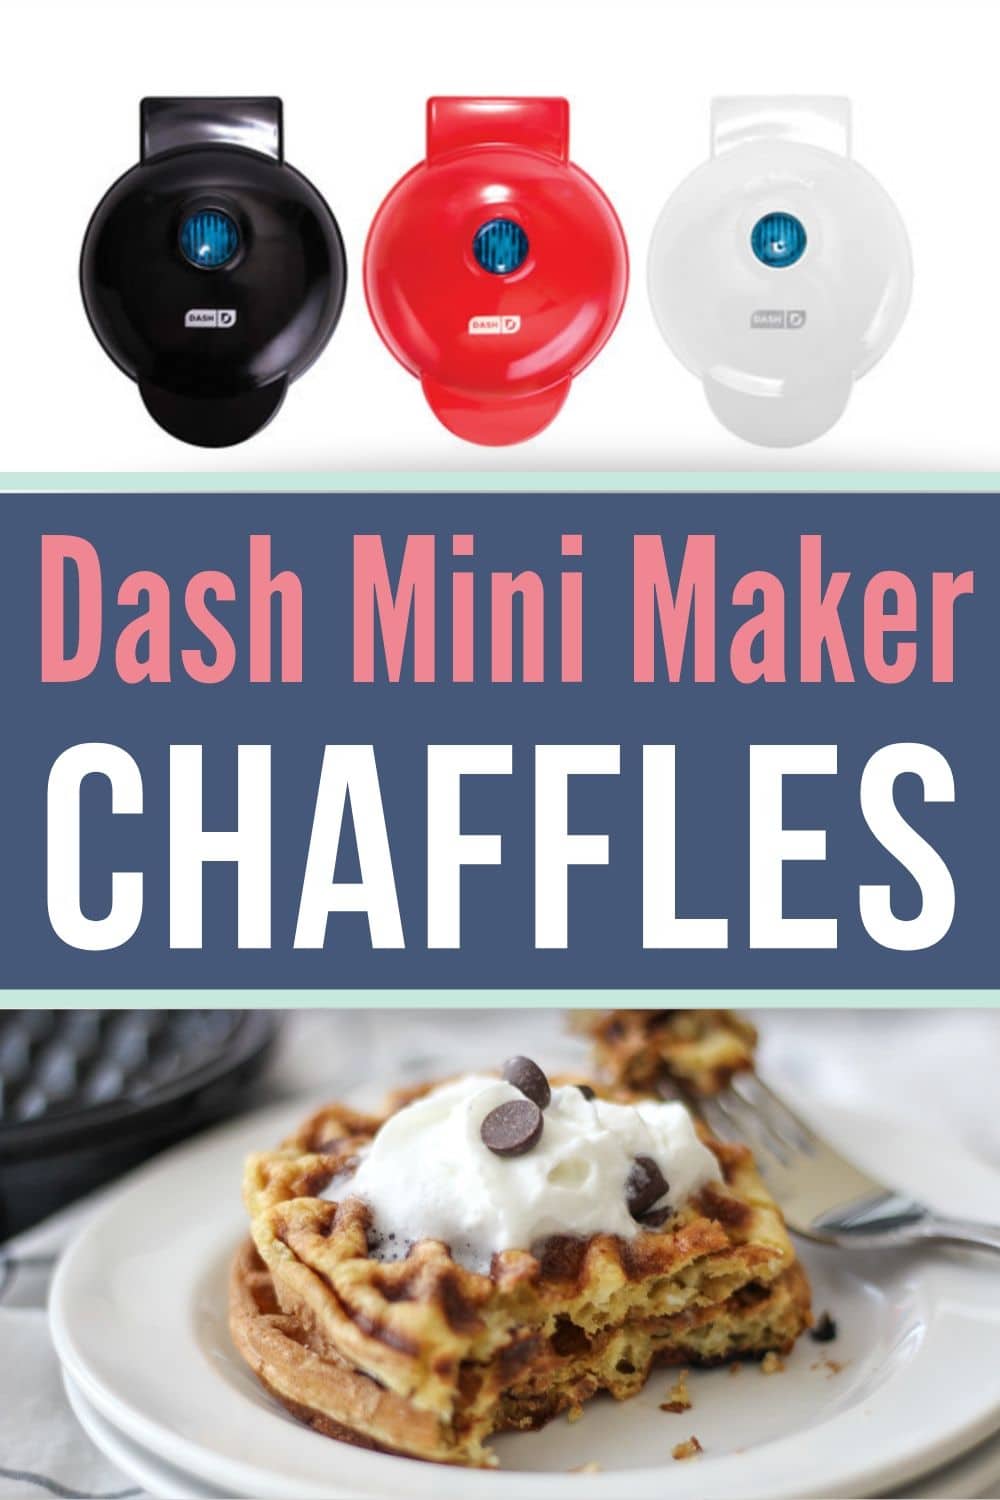 Dash MINI Waffle Iron 4 With The Best Keto Chaffle Recipe Book and Journal  by Charmed By Dragons (4 Inch MINI Red)